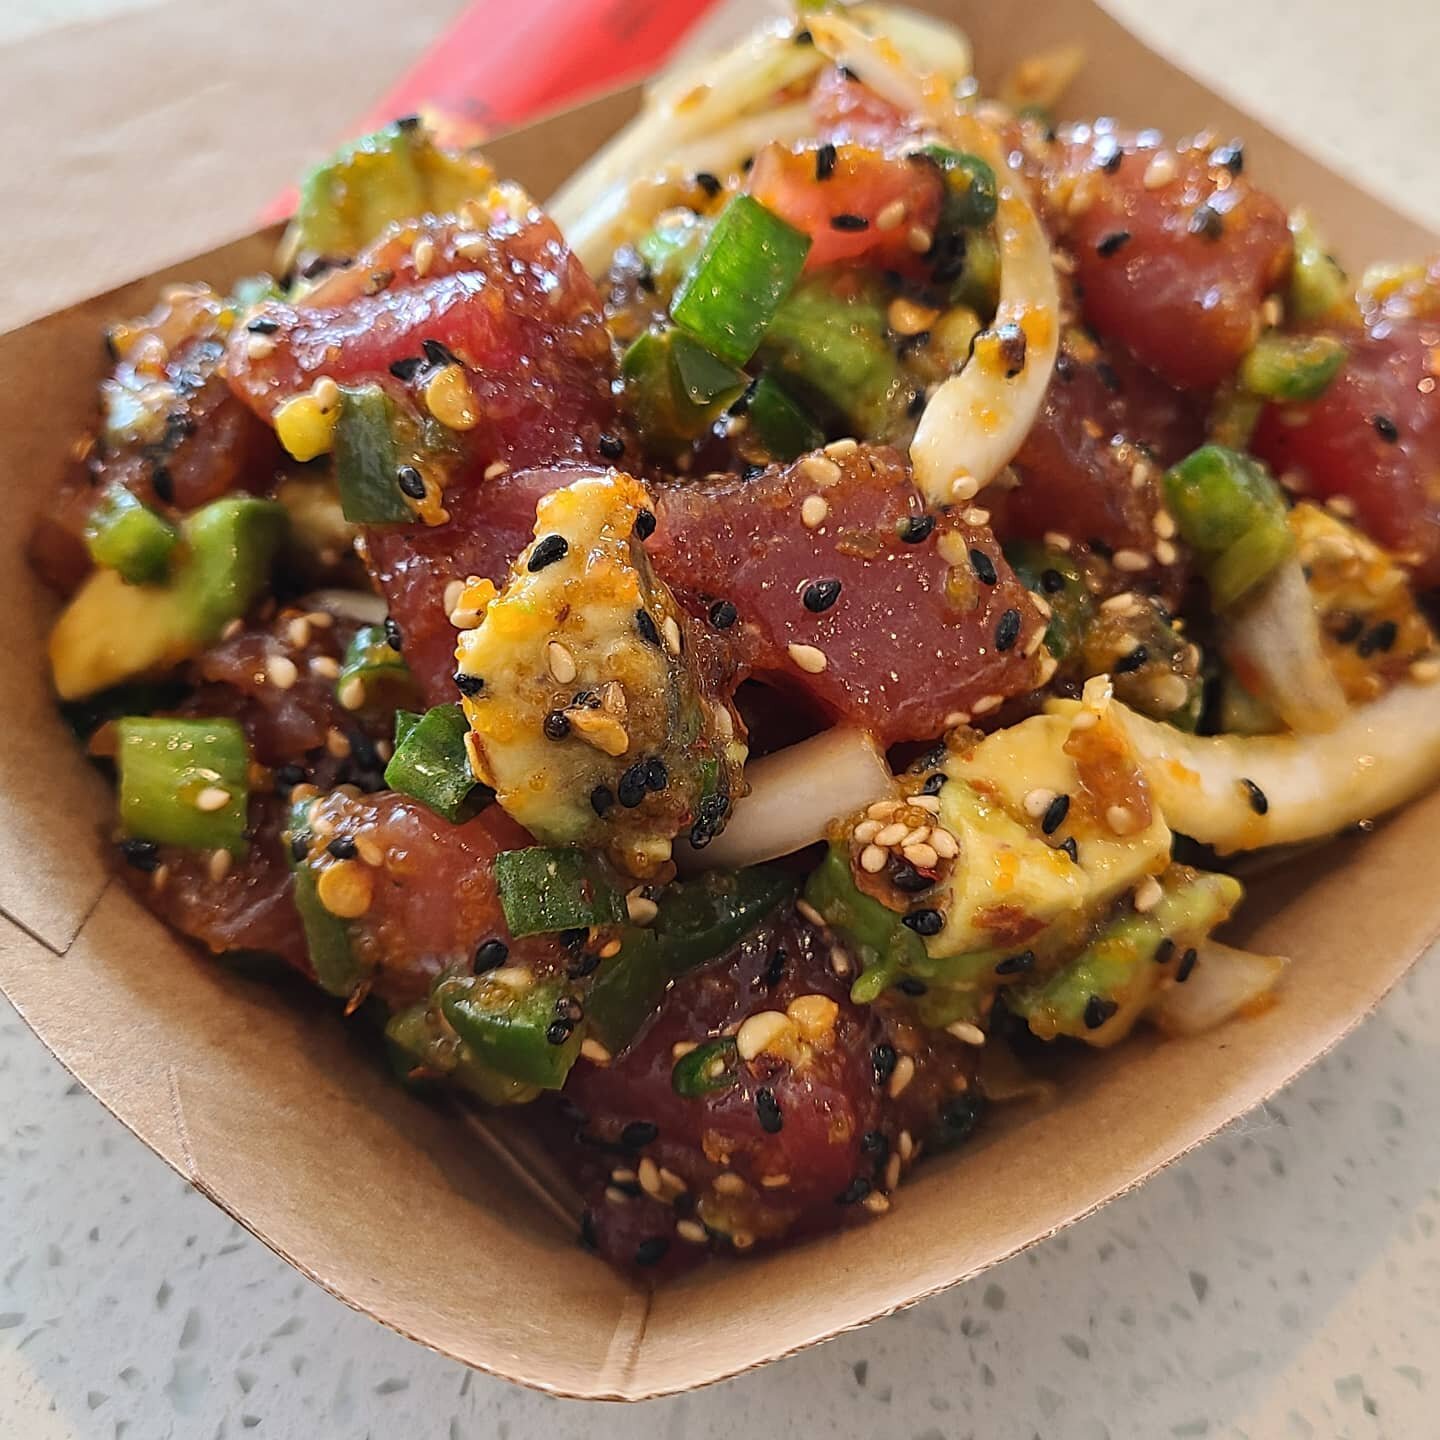 Our.authentic poke is next level when you order the big eye tuna!! This tuna is what inspired us in Hawaii.. let it inspire you!!

#freshcatch #realpoke #pokebowls #freshtuna #atxfood #austin360eats #texasmonthlyeats #takeout